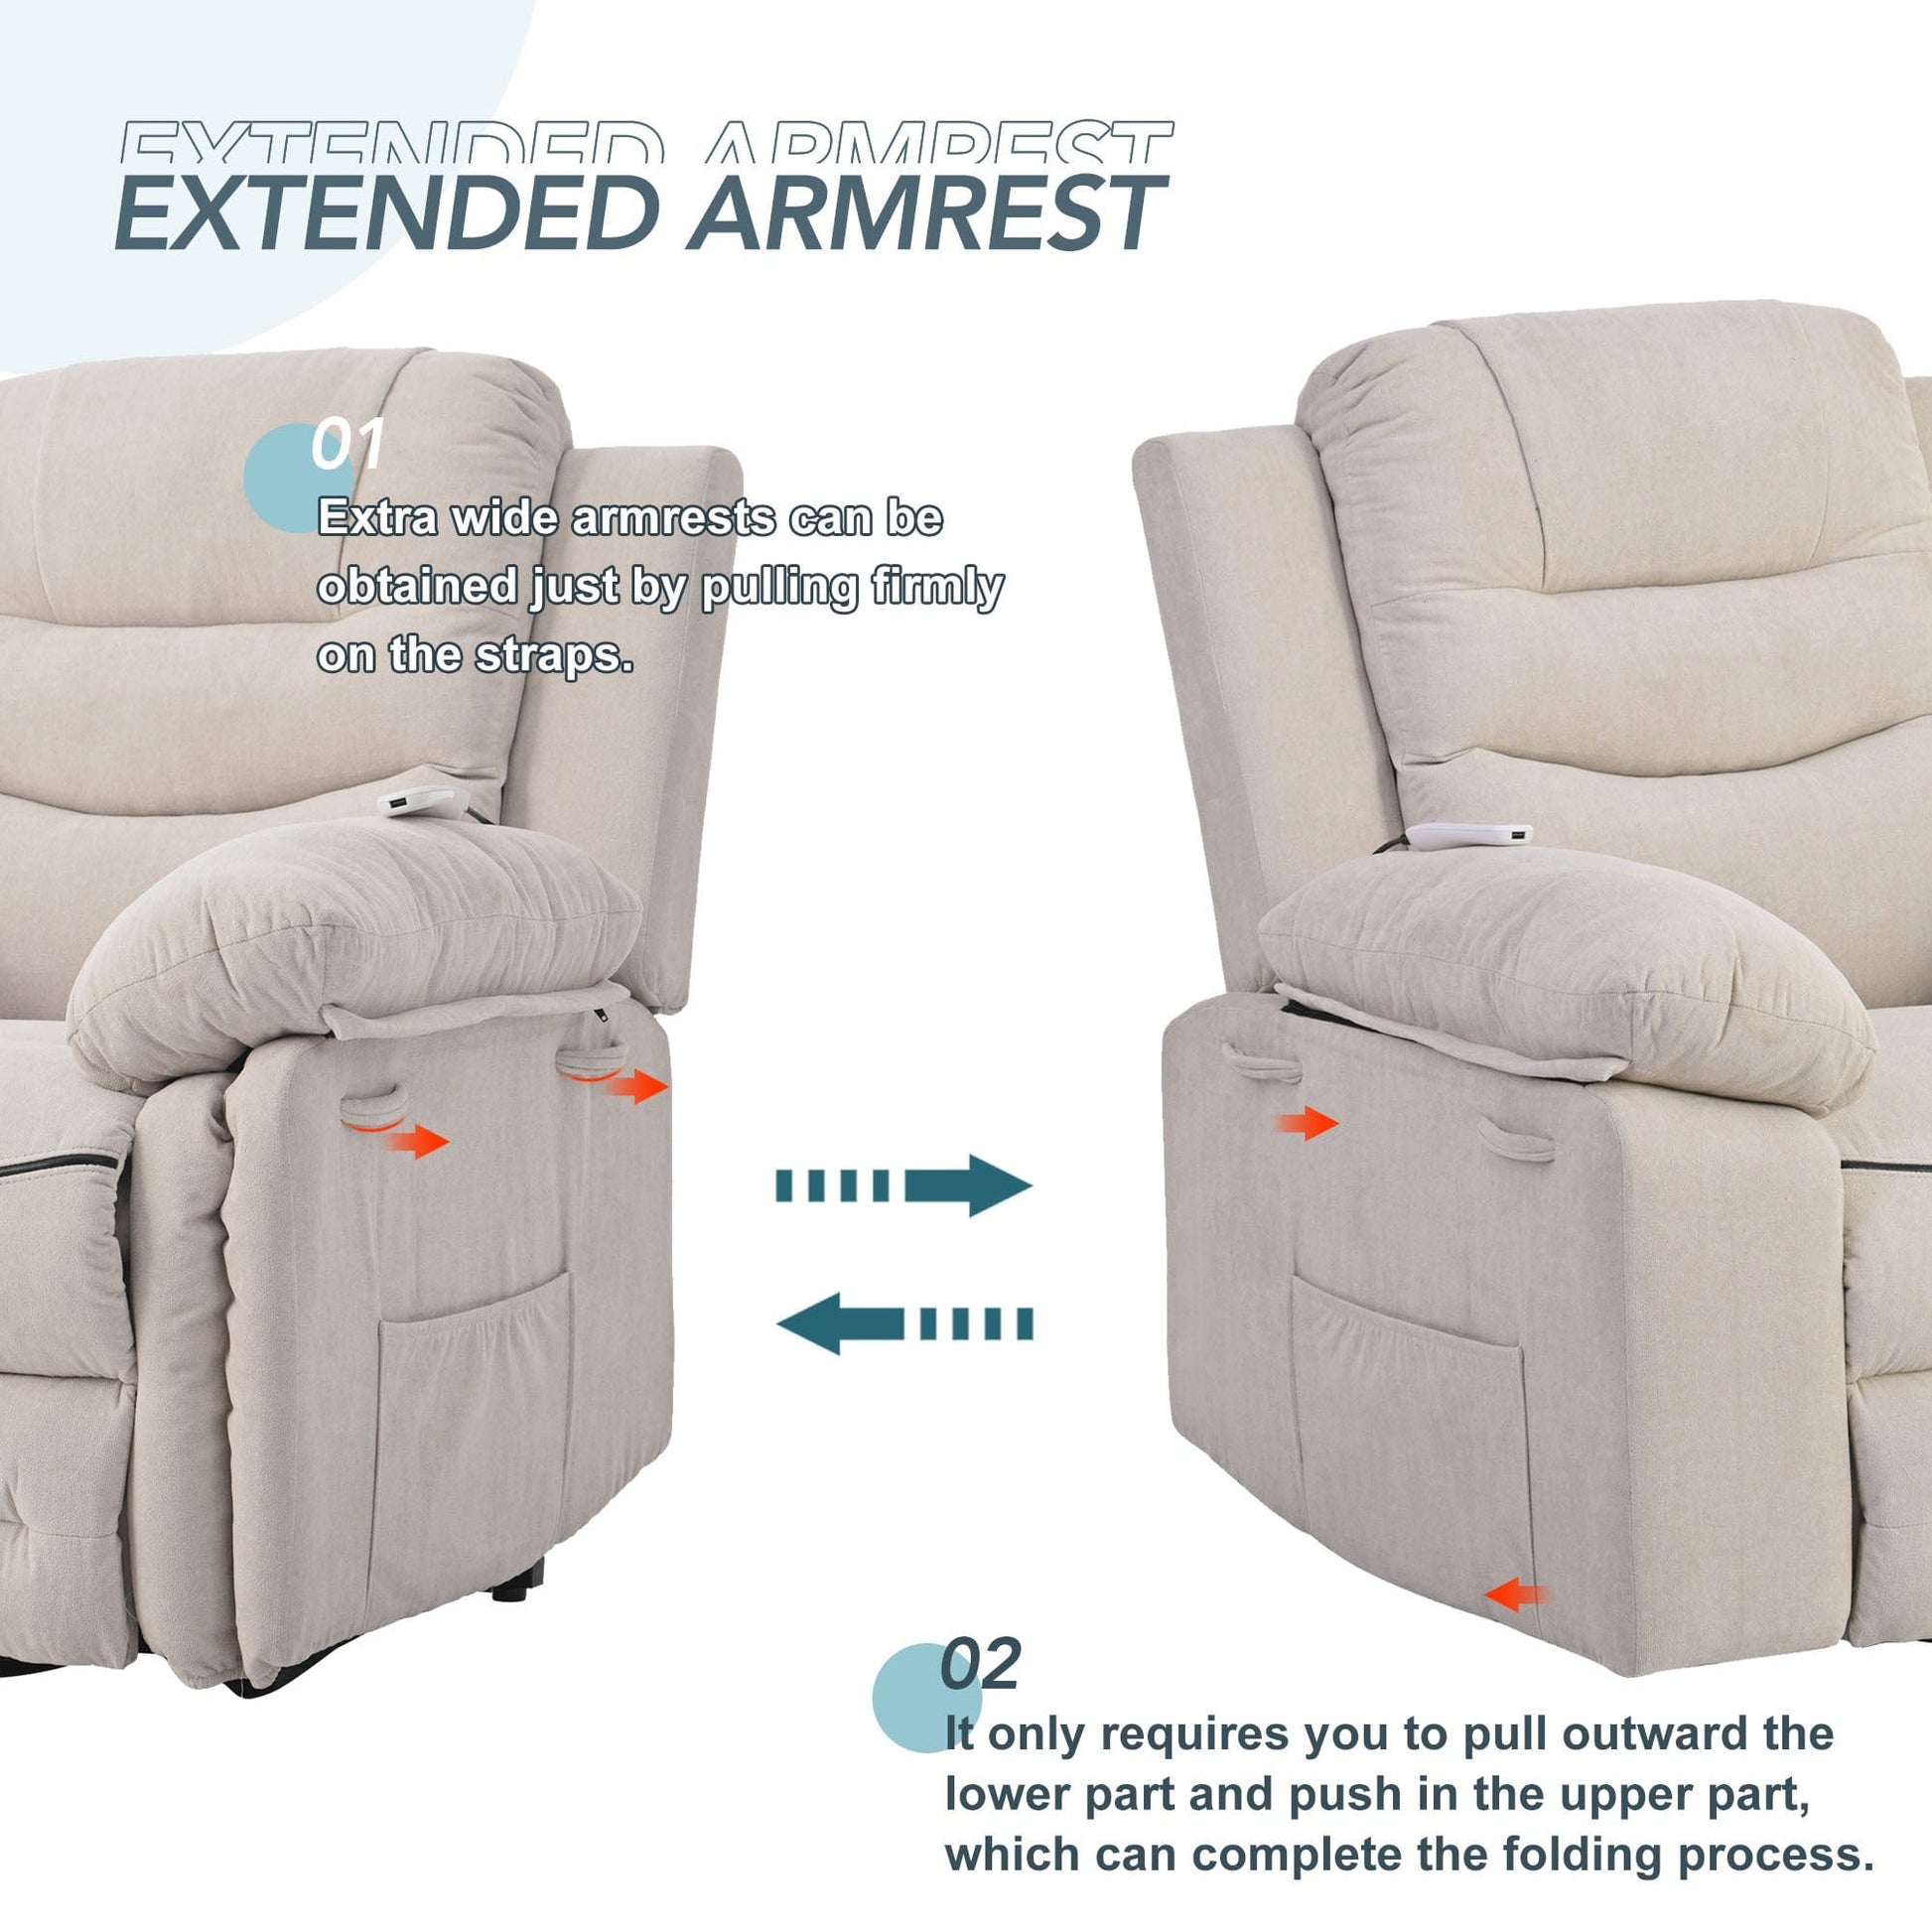 1st Choice Furniture Direct Power Motion Recliner 1st Choice Power Recliner Lift Chair for Living Room in Beige Finish